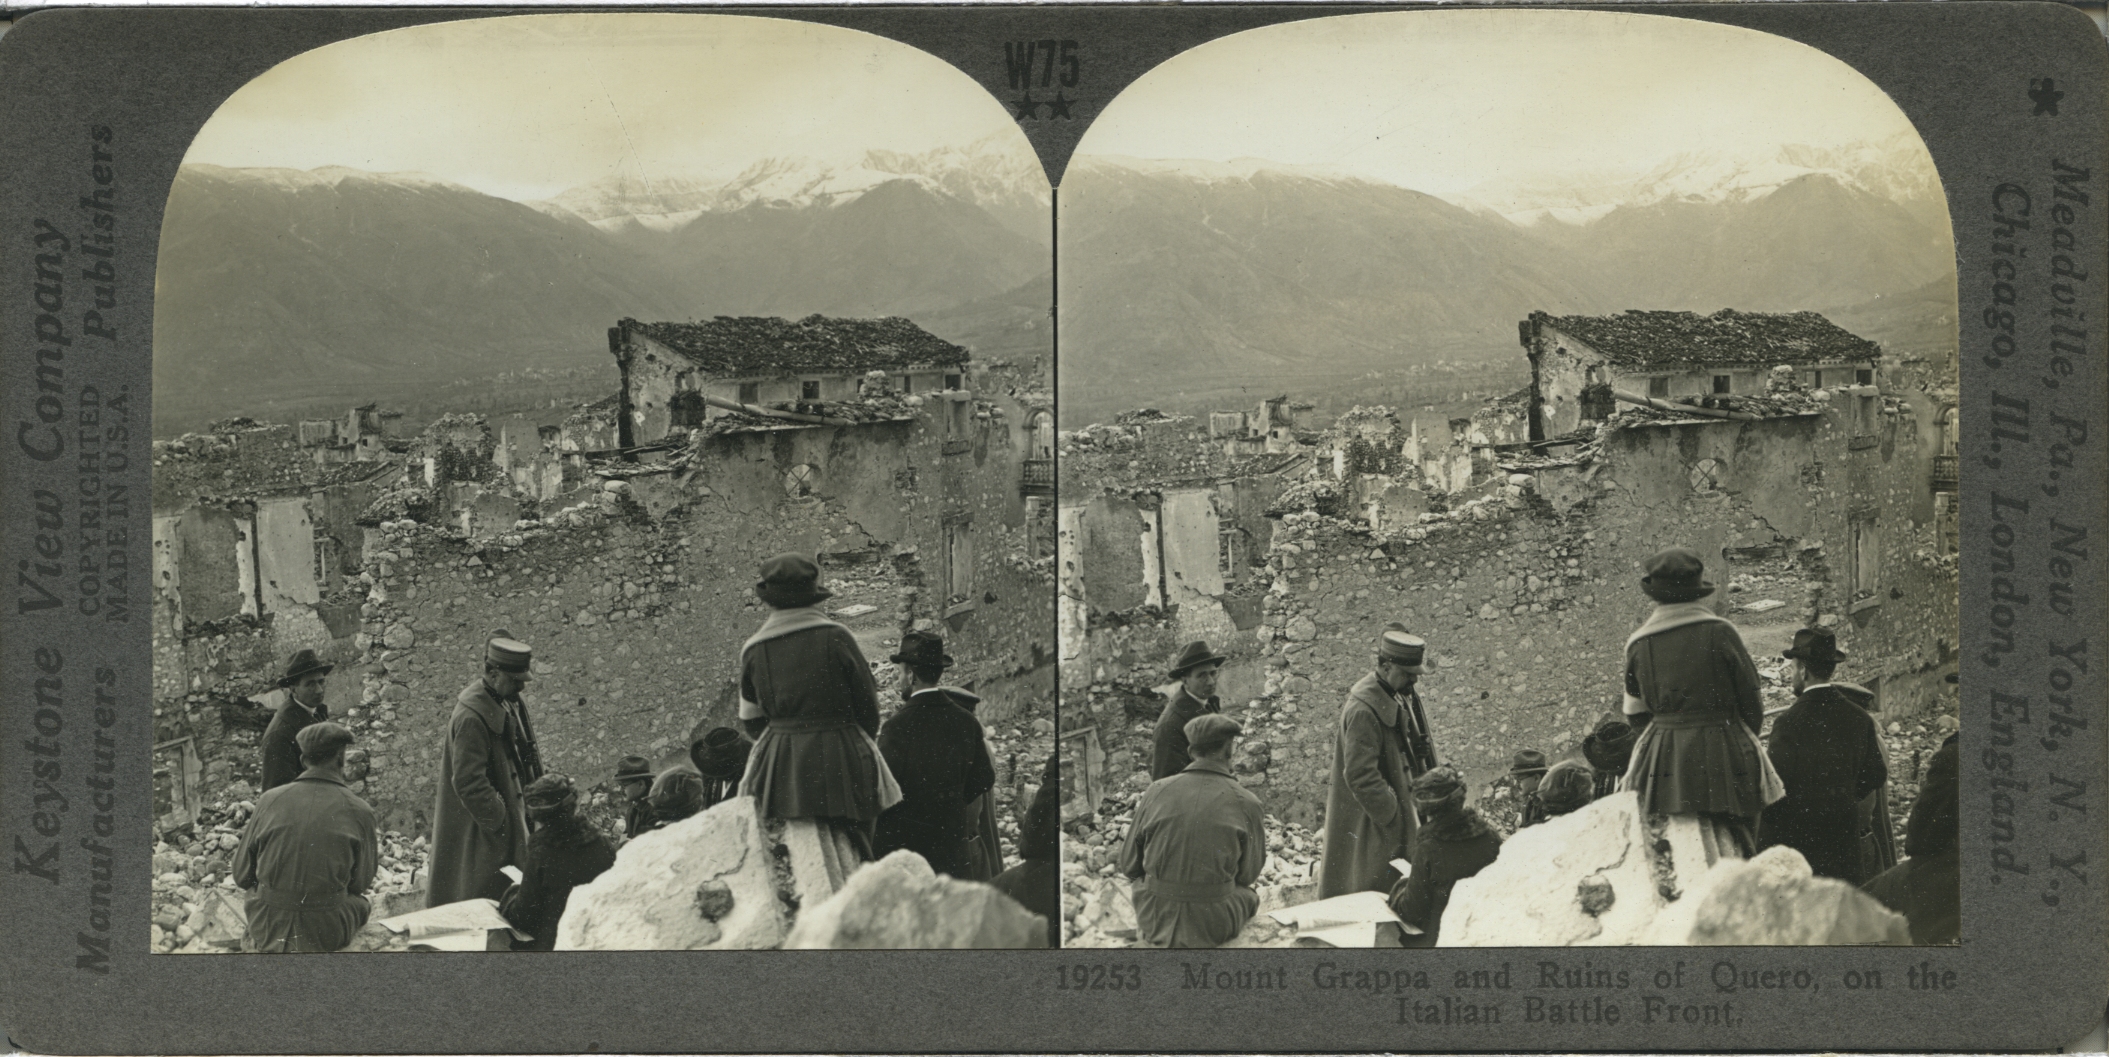 Mount Grappa and Ruins of Quero, on the Italian Battle Front